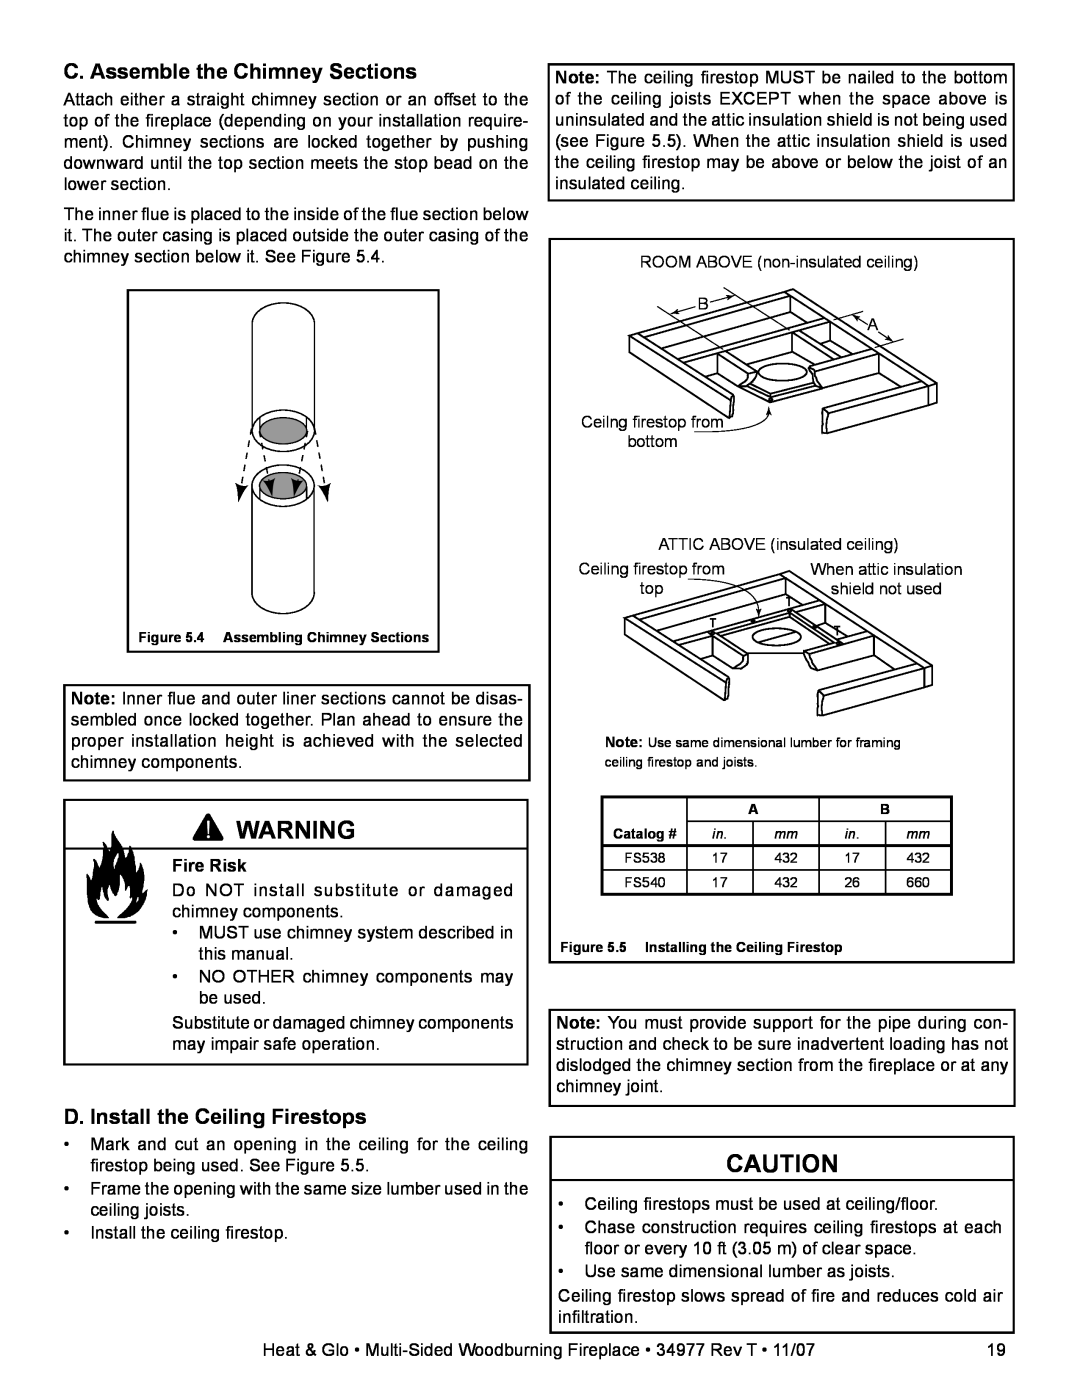 Heat & Glo LifeStyle BAY-40 owner manual C. Assemble the Chimney Sections, D. Install the Ceiling Firestops, Fire Risk 